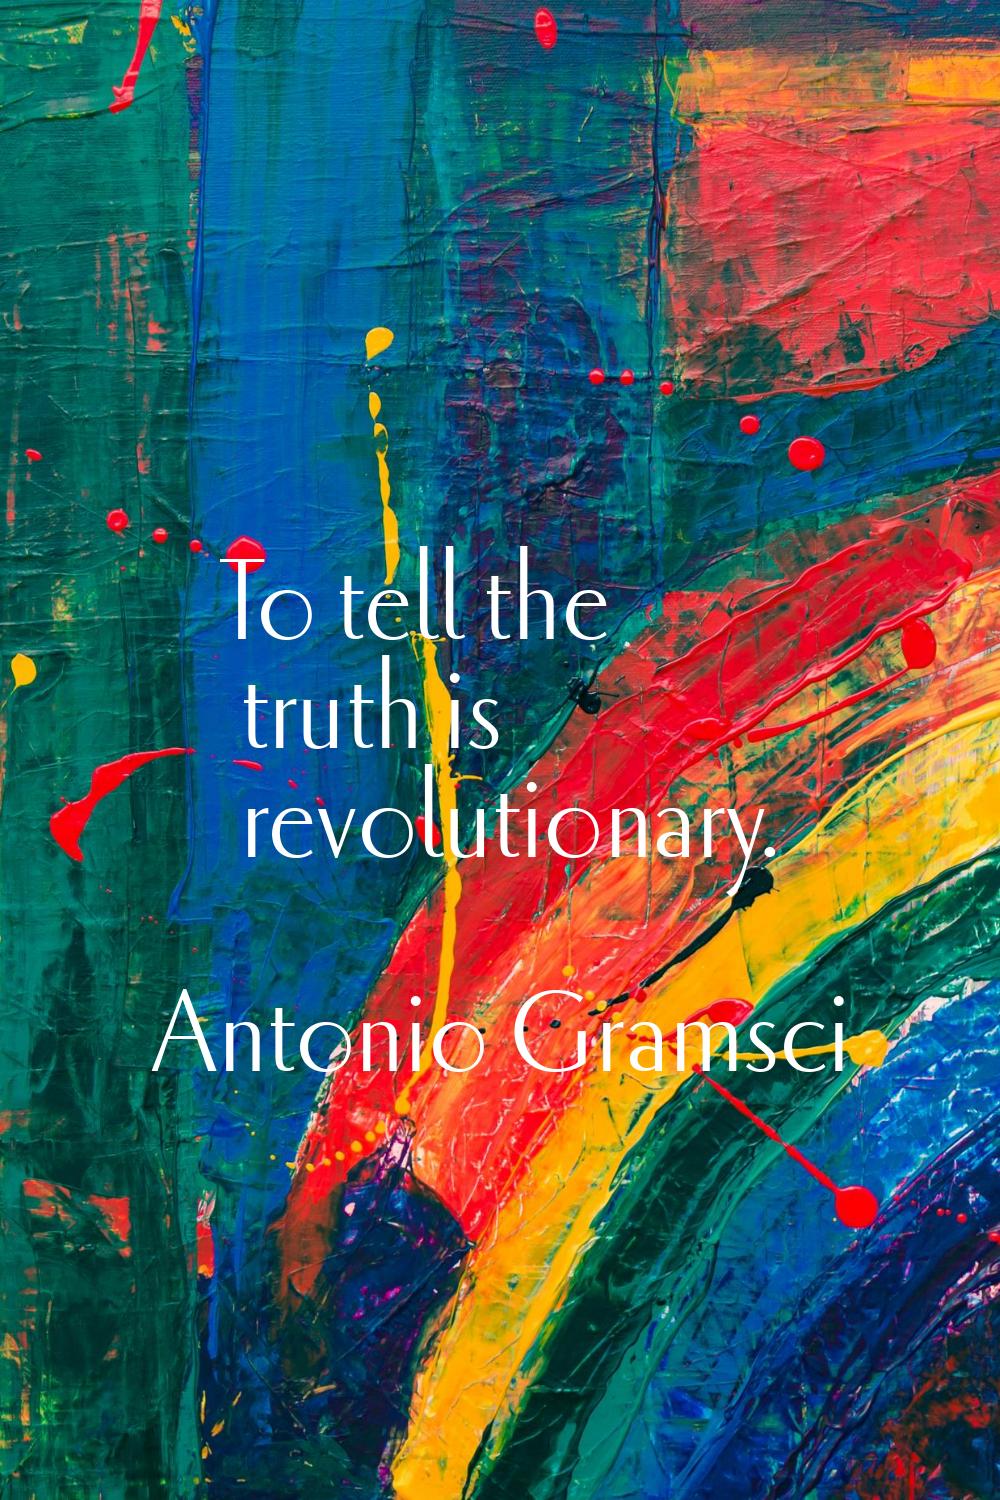 To tell the truth is revolutionary.